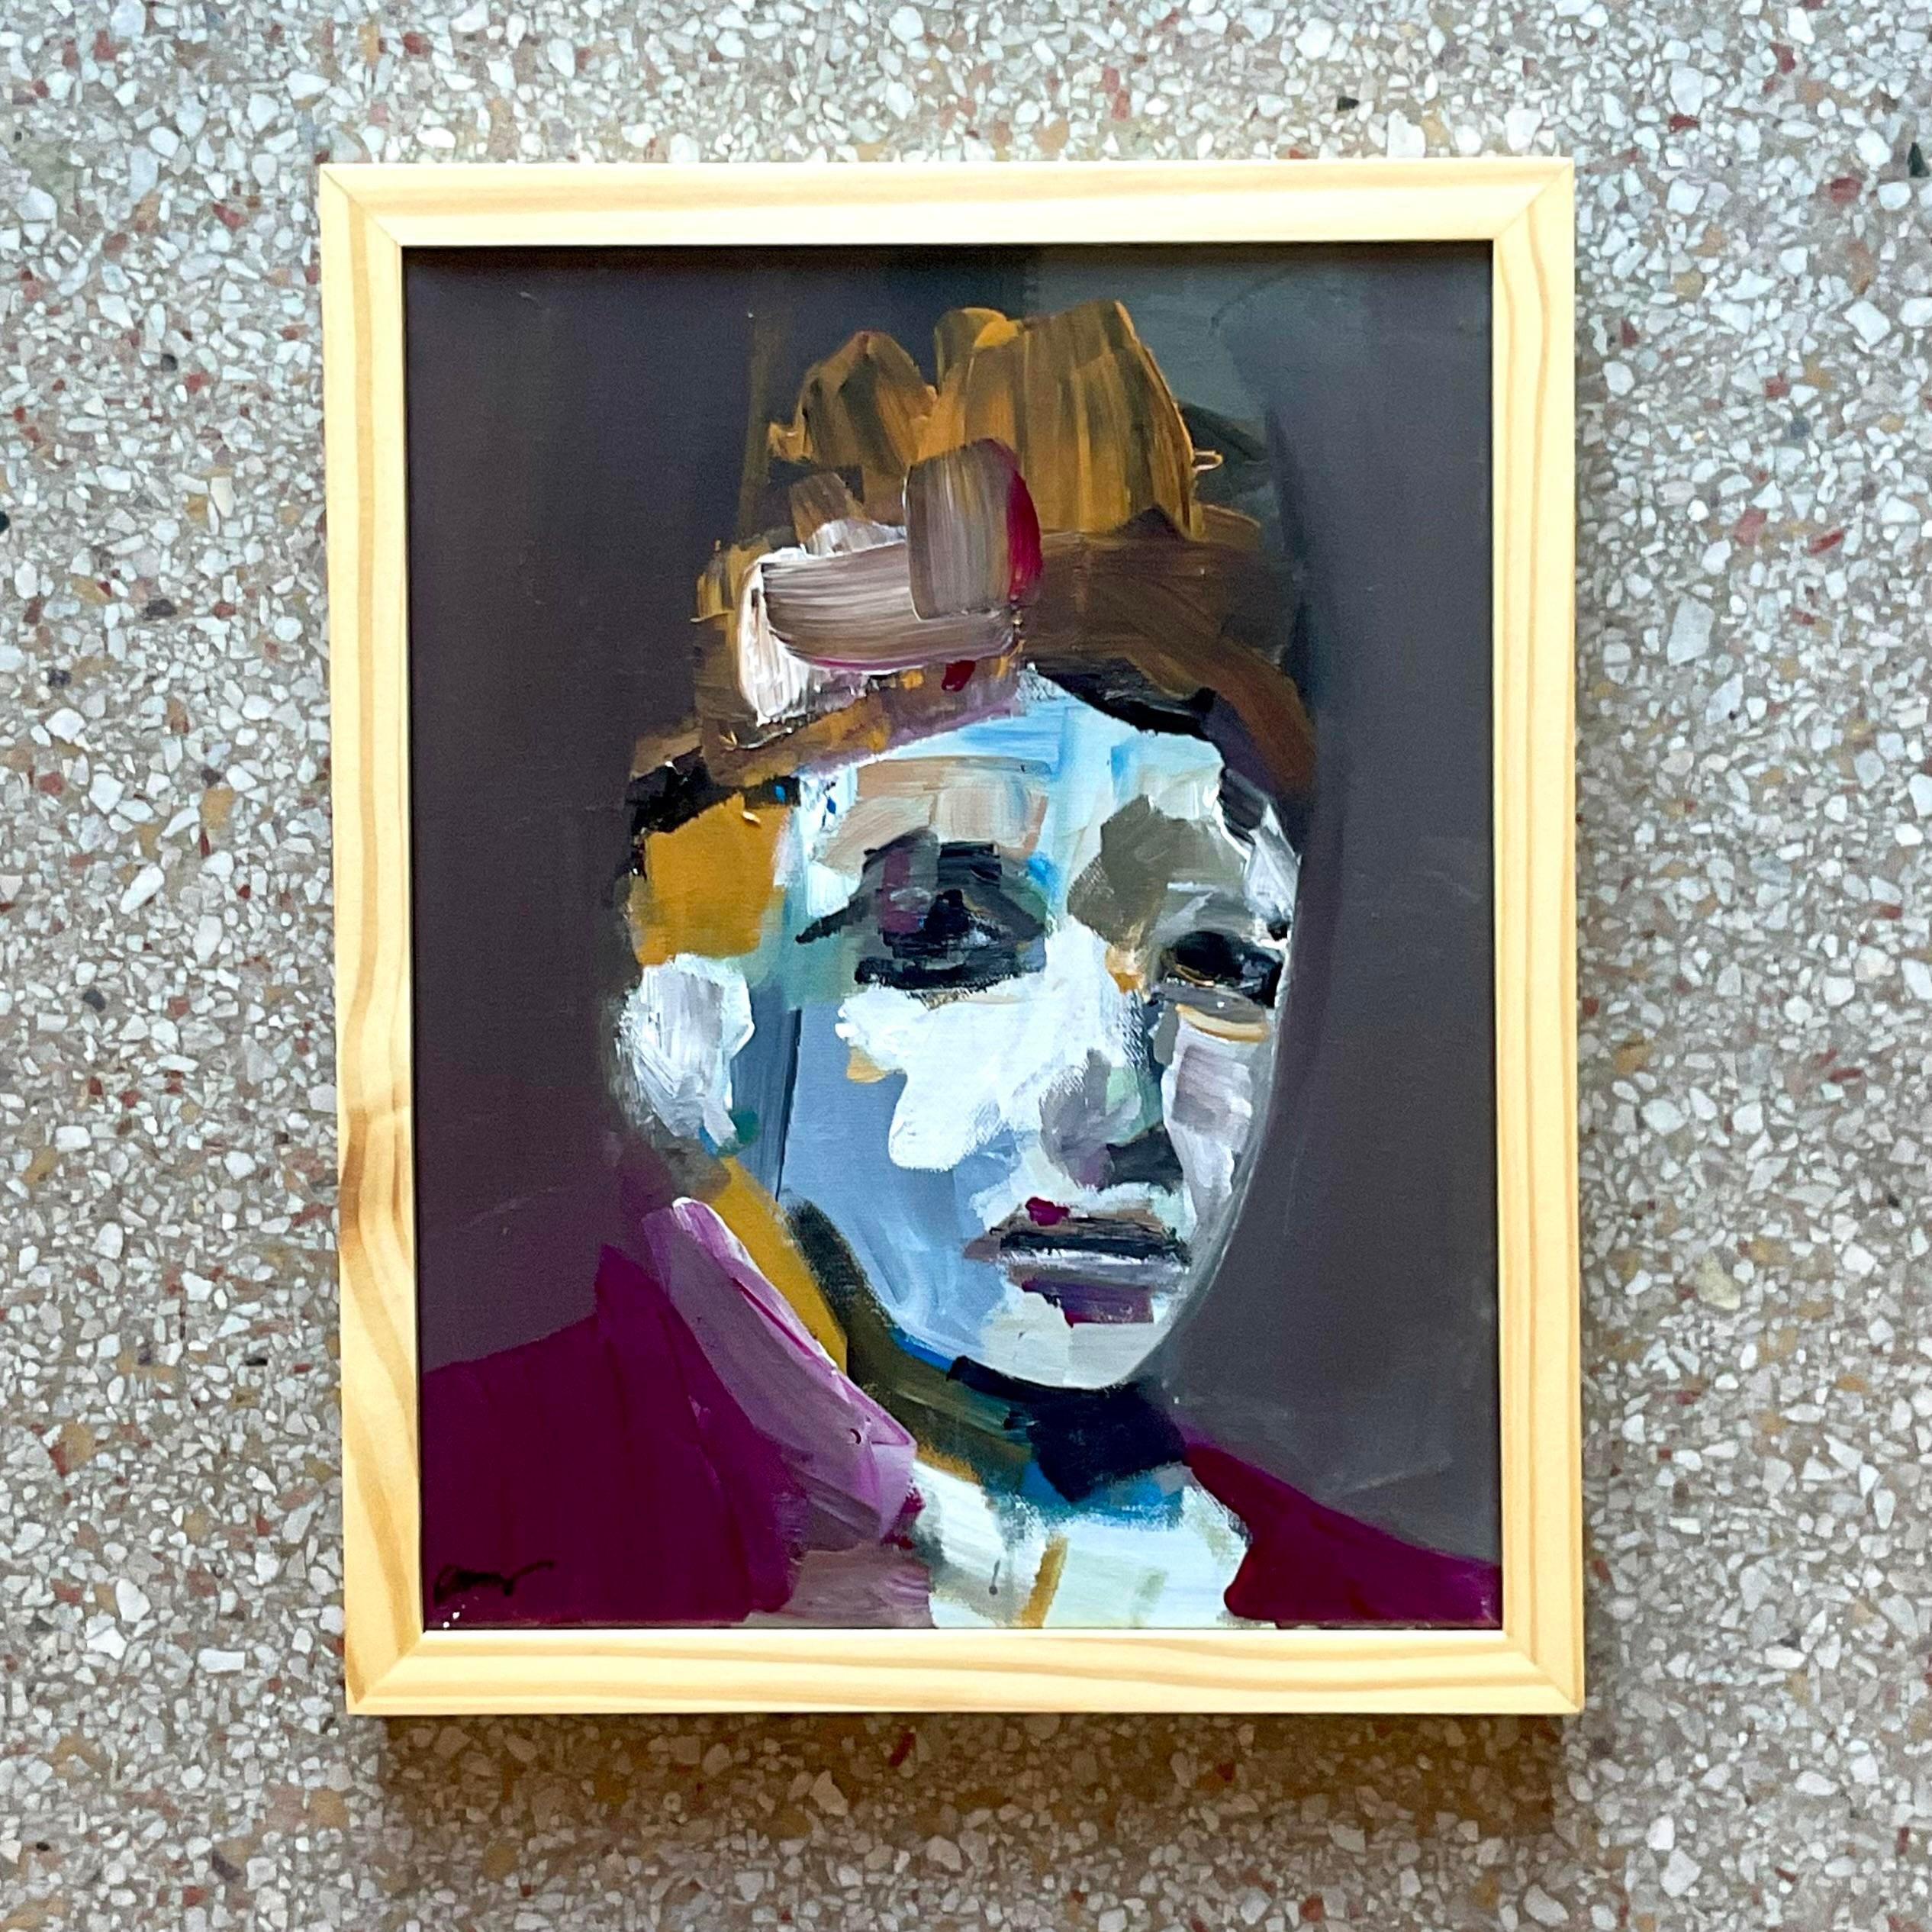 A fabulous vintage Boho original oil portrait on canvas. A chic Abstract Figural in rich deep colors. Signed by the artist. Acquired from a Palm Beach estate.